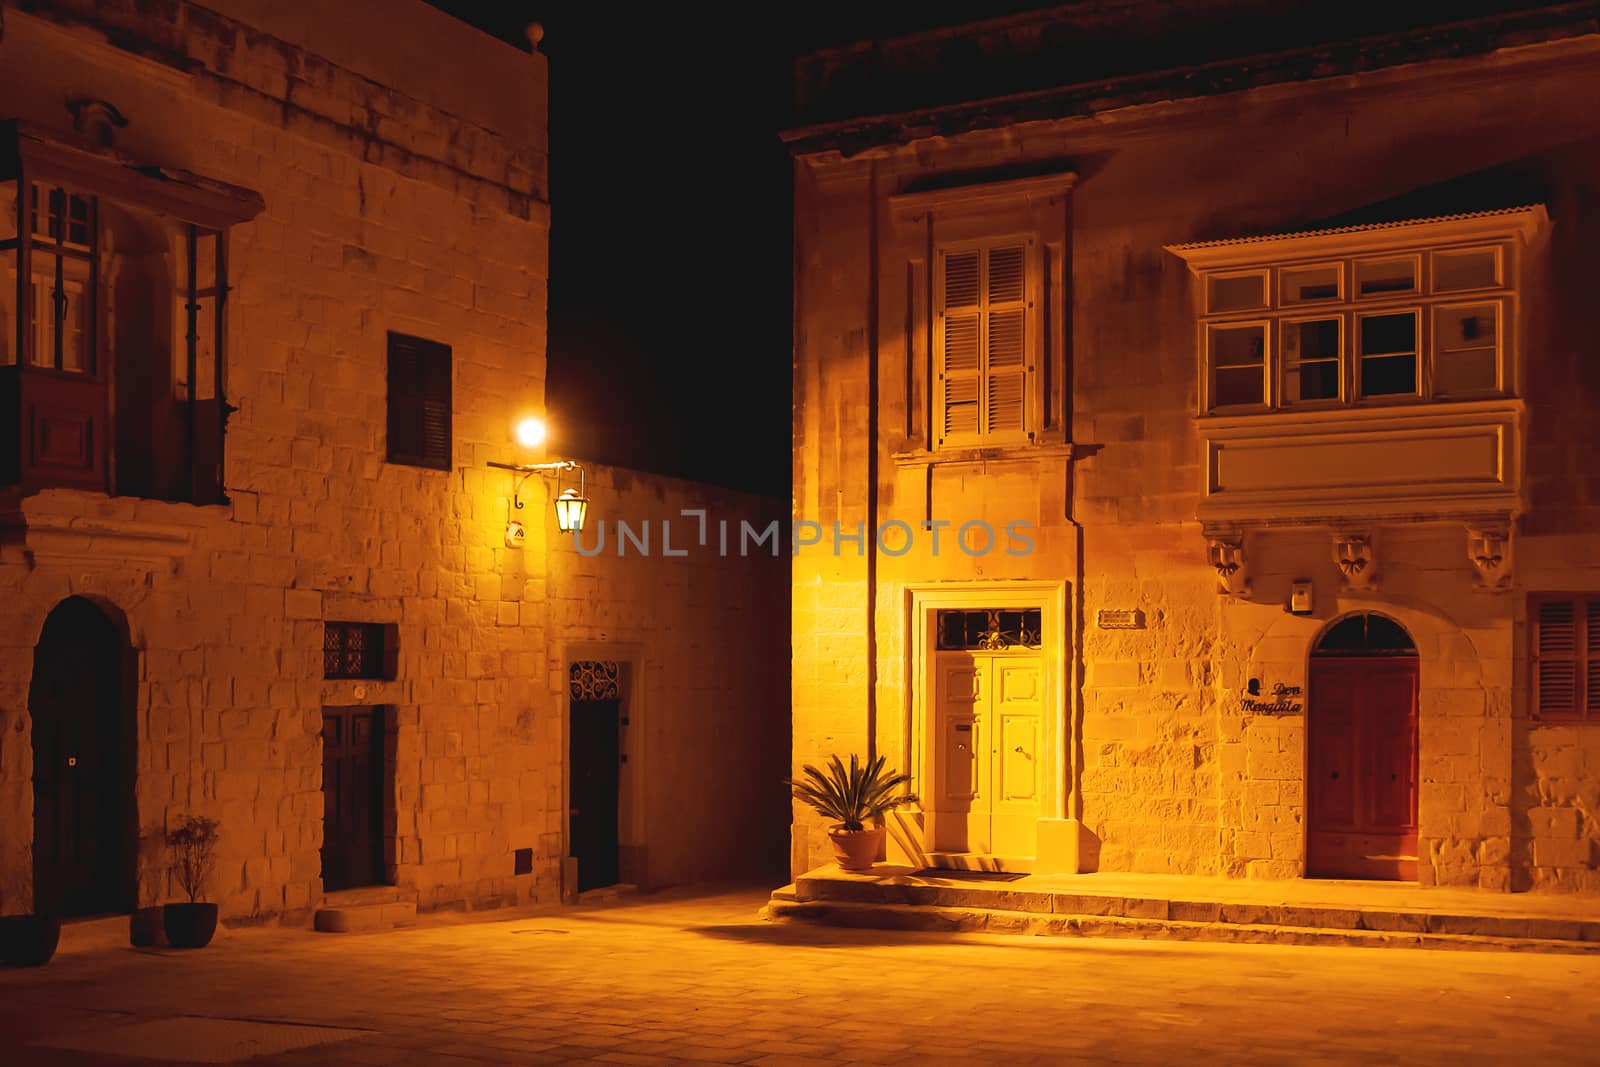 Illuminated streets of Mdina, ancient capital of Malta. Night view on buildings and wall decorations of ancient town.